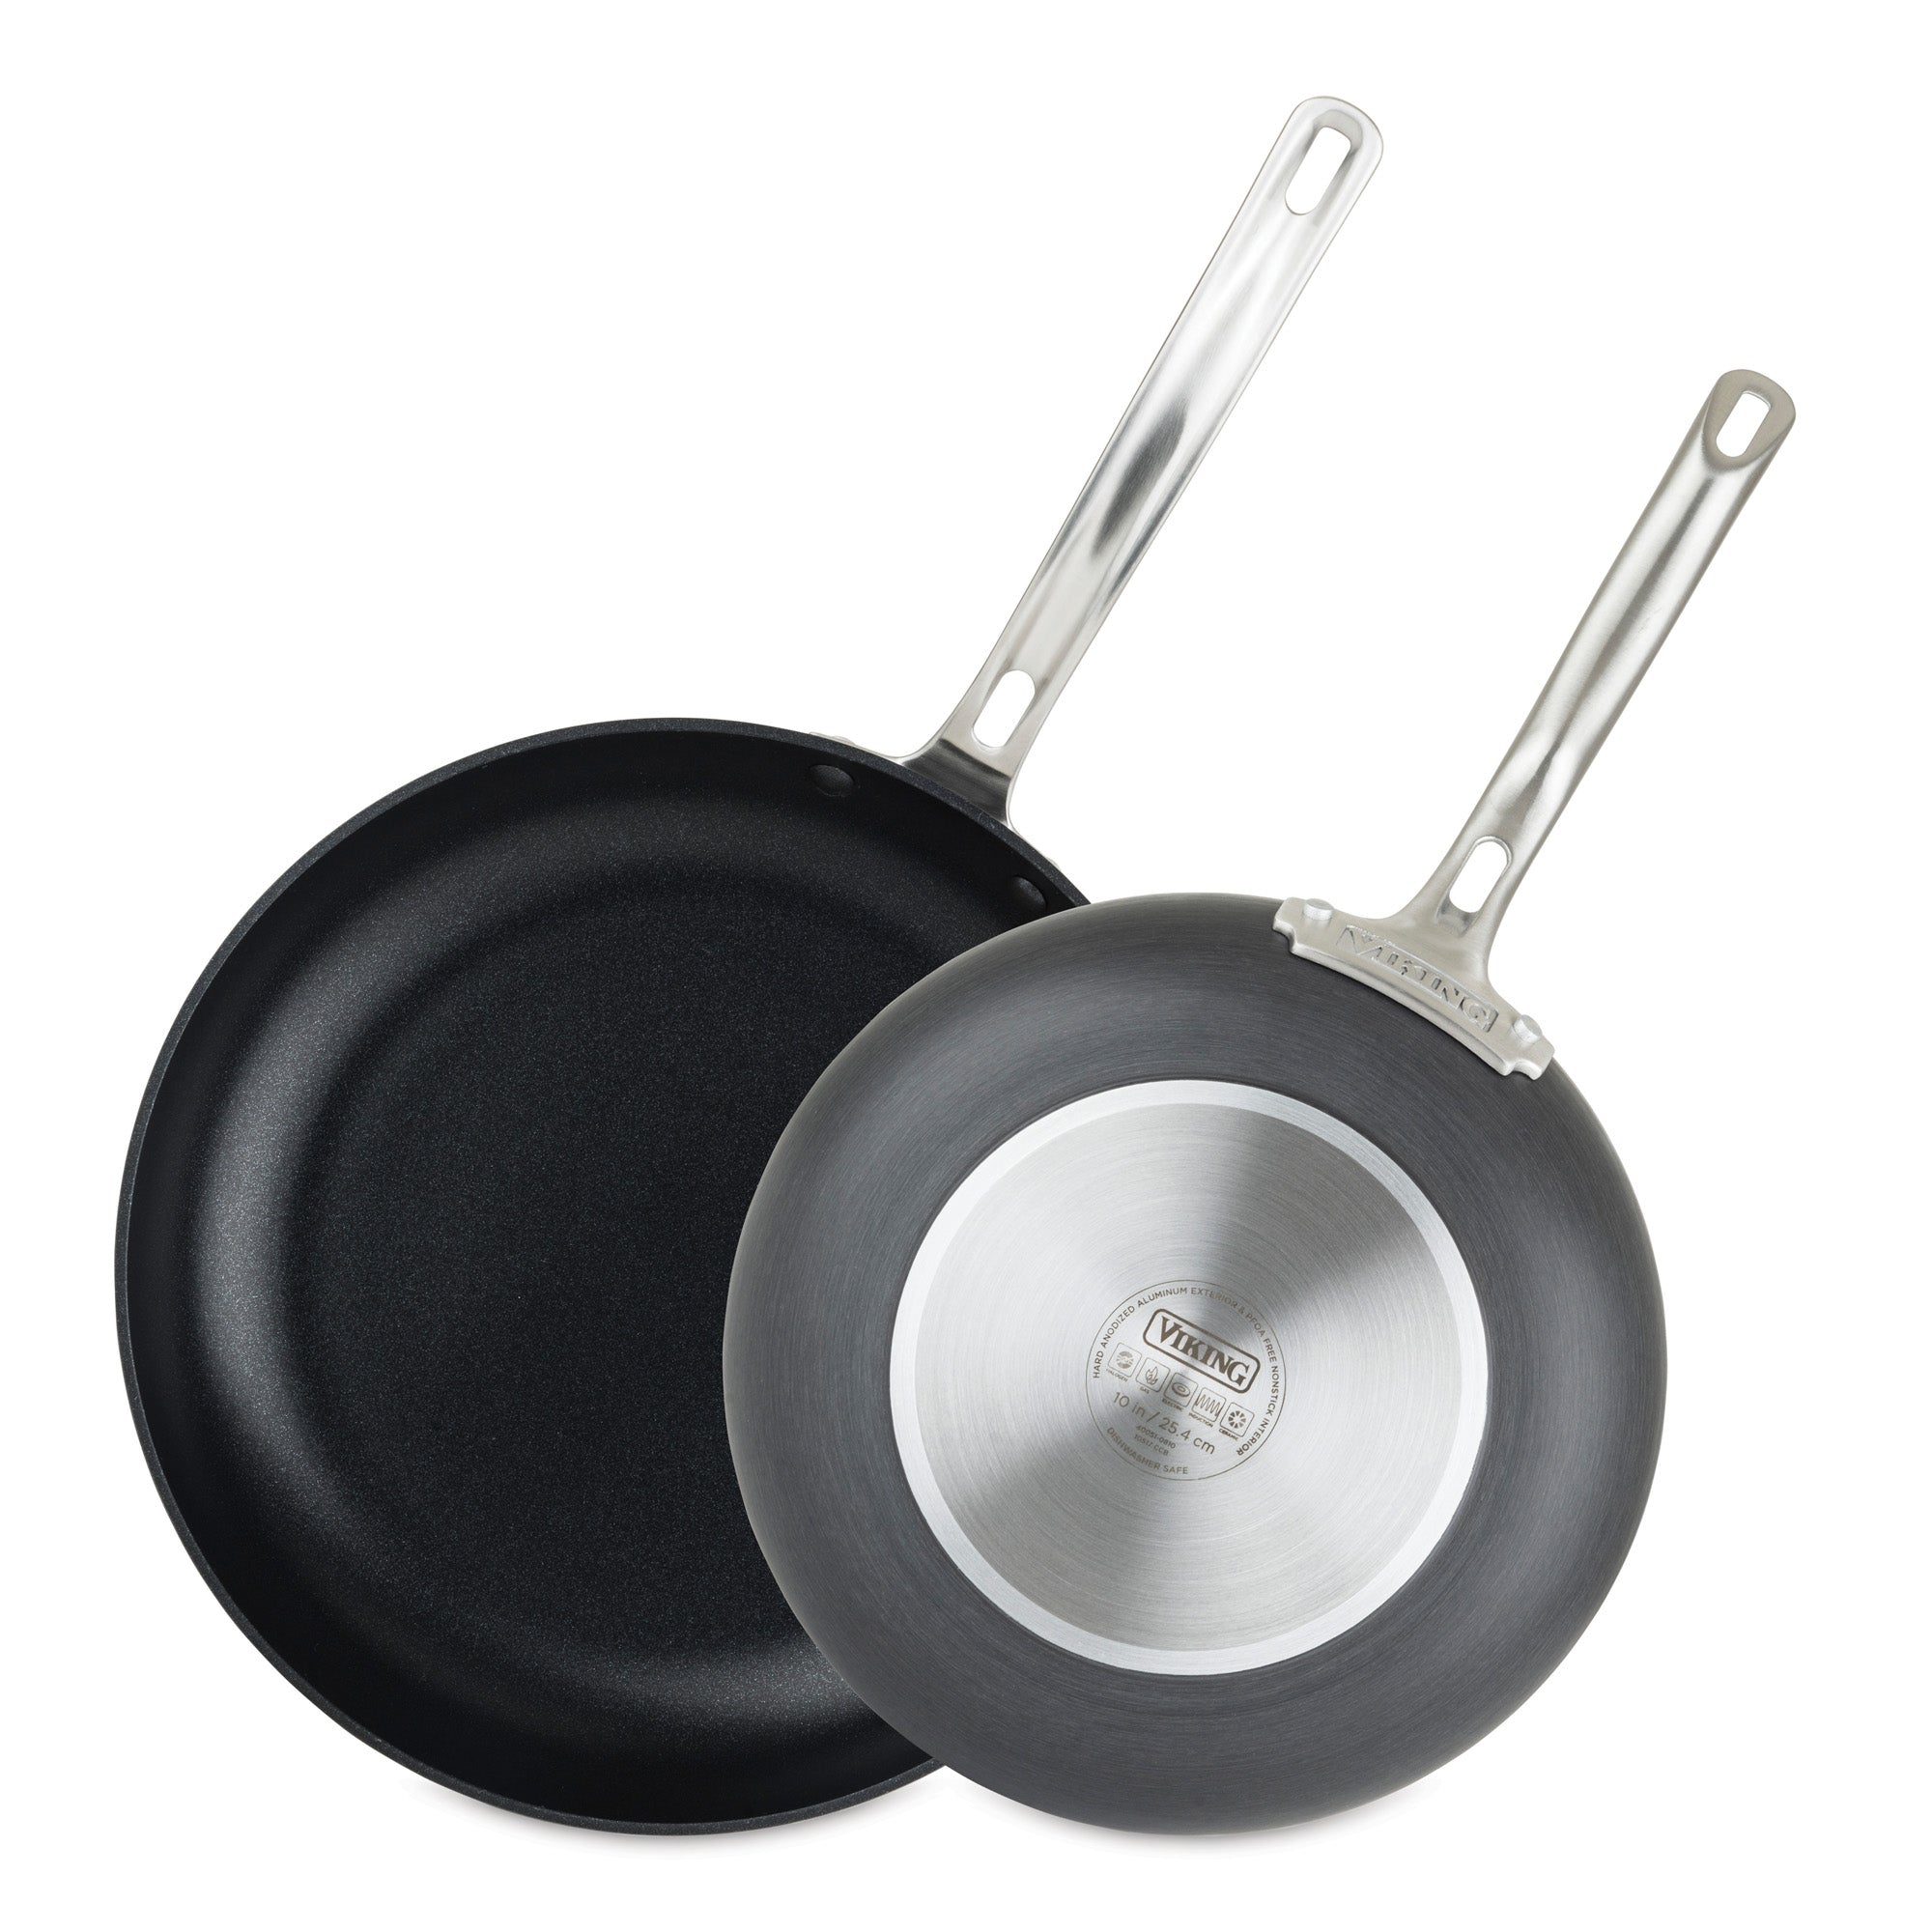 OXO Good Grips Hard Anodized PFOA-Free Nonstick 8 and 10 Frying Pan